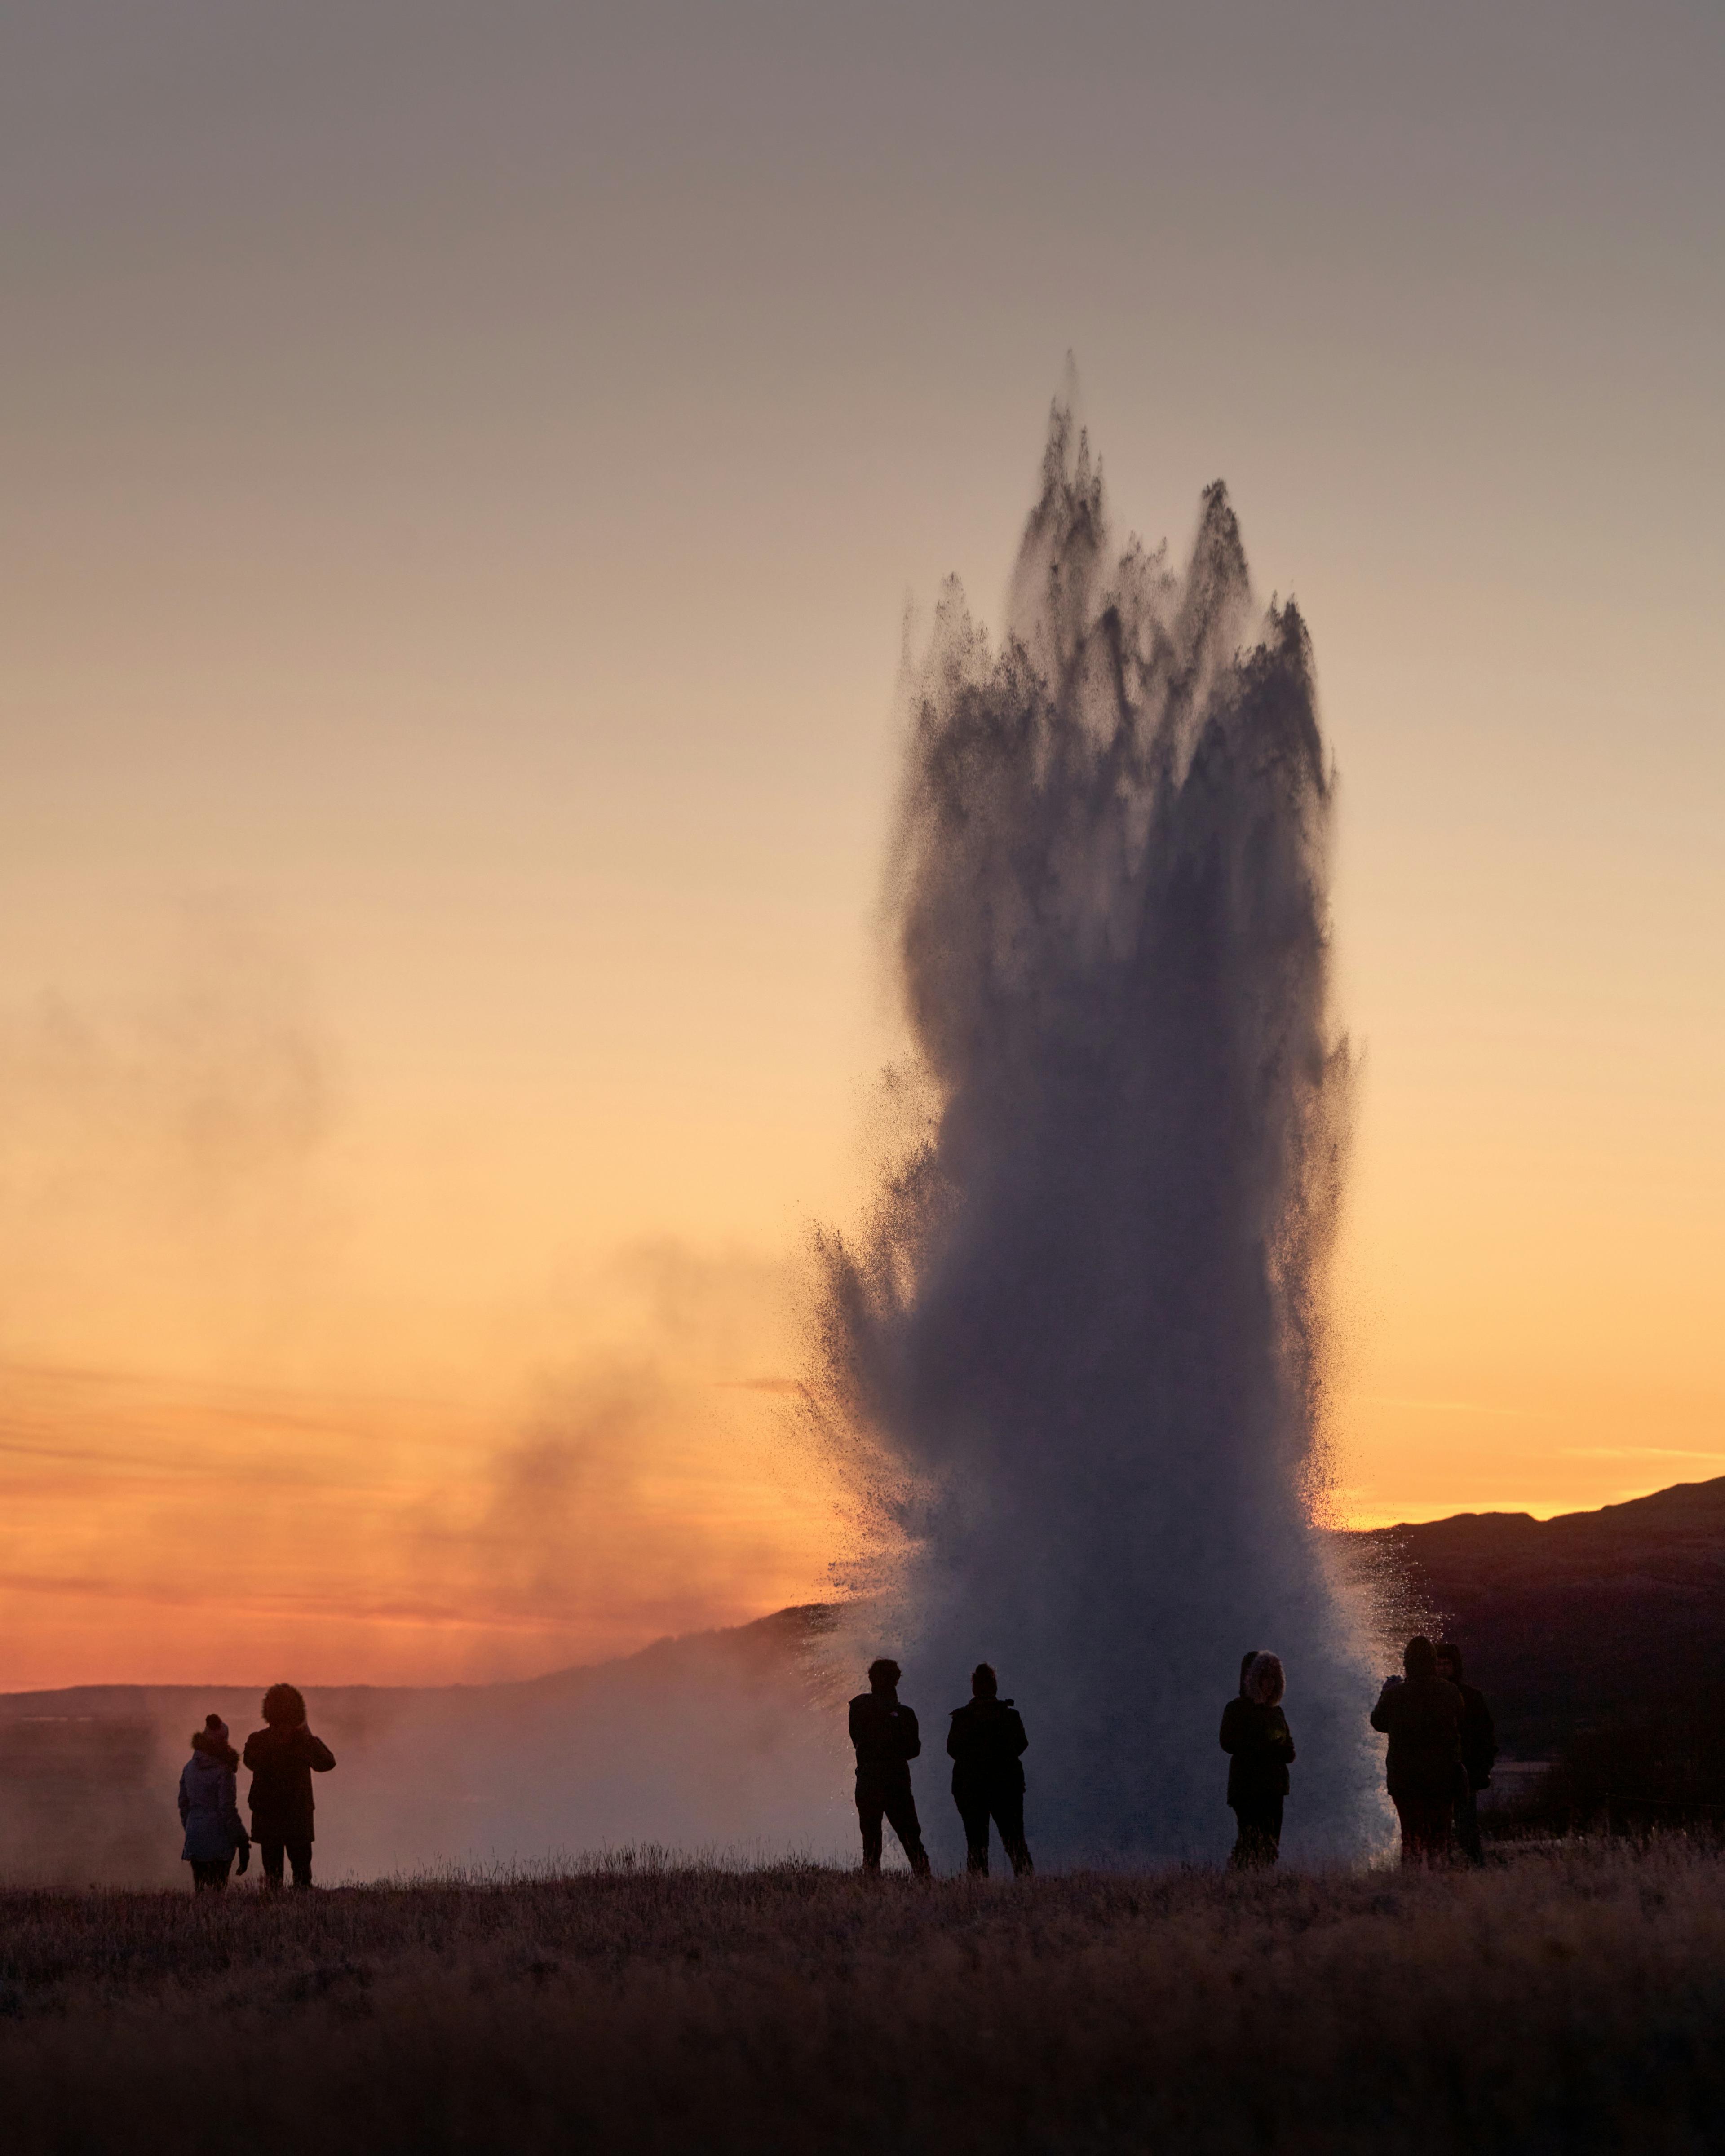 Silhouetted figures stand in awe as a geyser erupts into the twilight sky, its plume highlighted by the warm hues of sunset, a captivating moment of natural wonder.